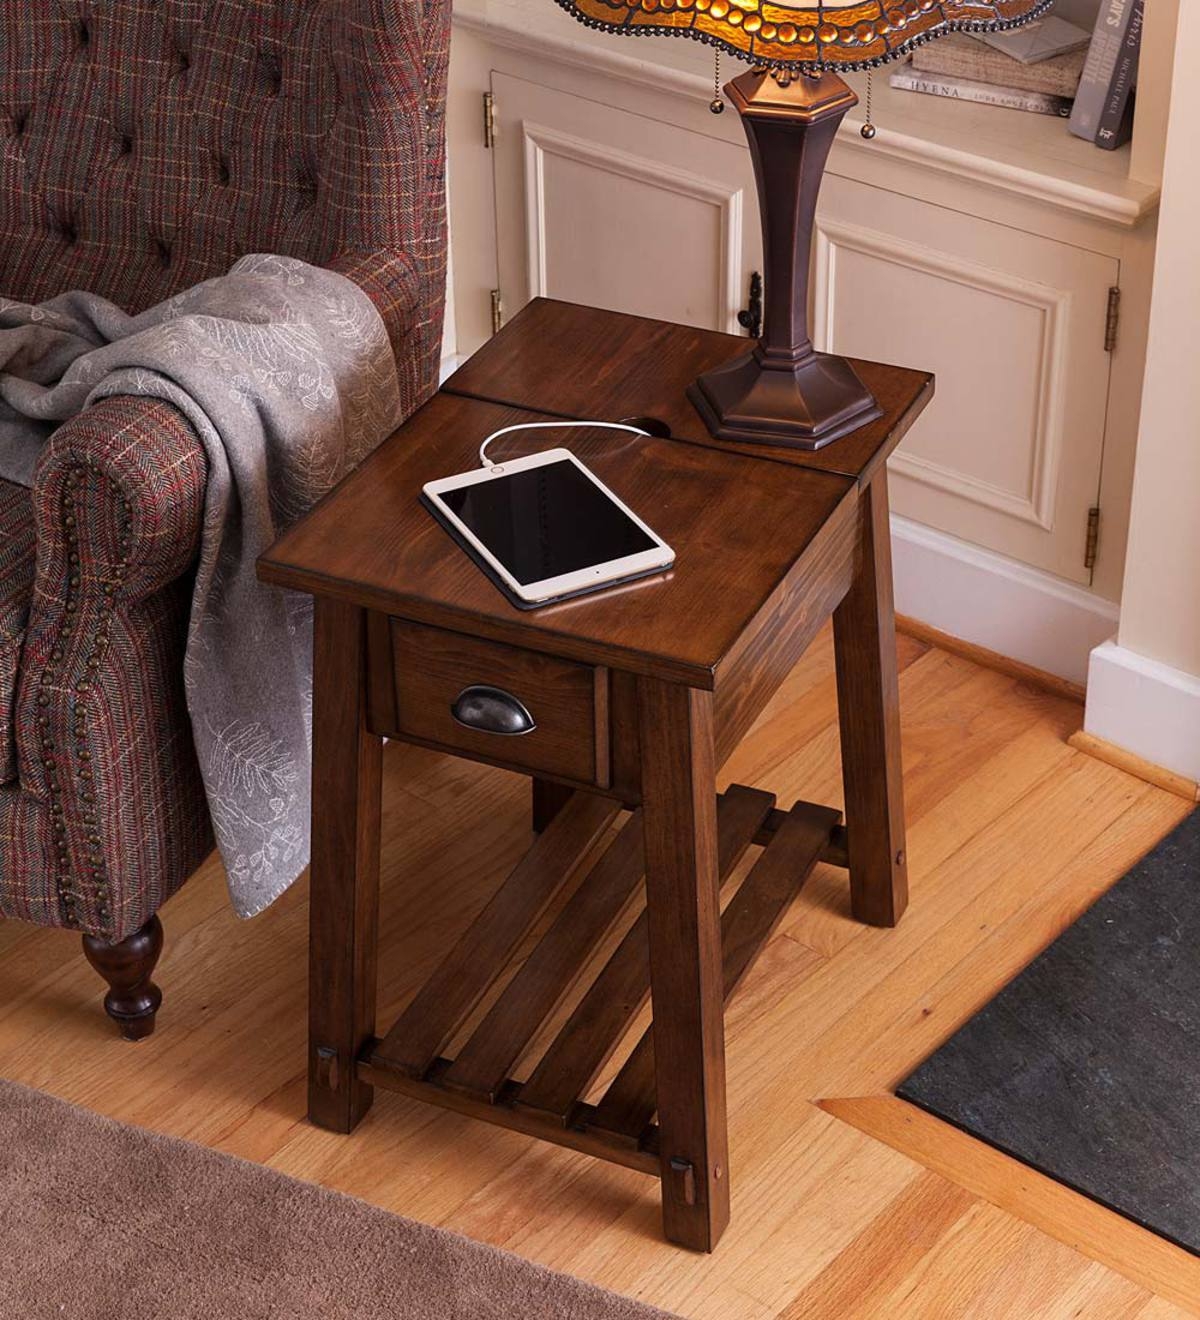 End Table With Charging Station Visualhunt